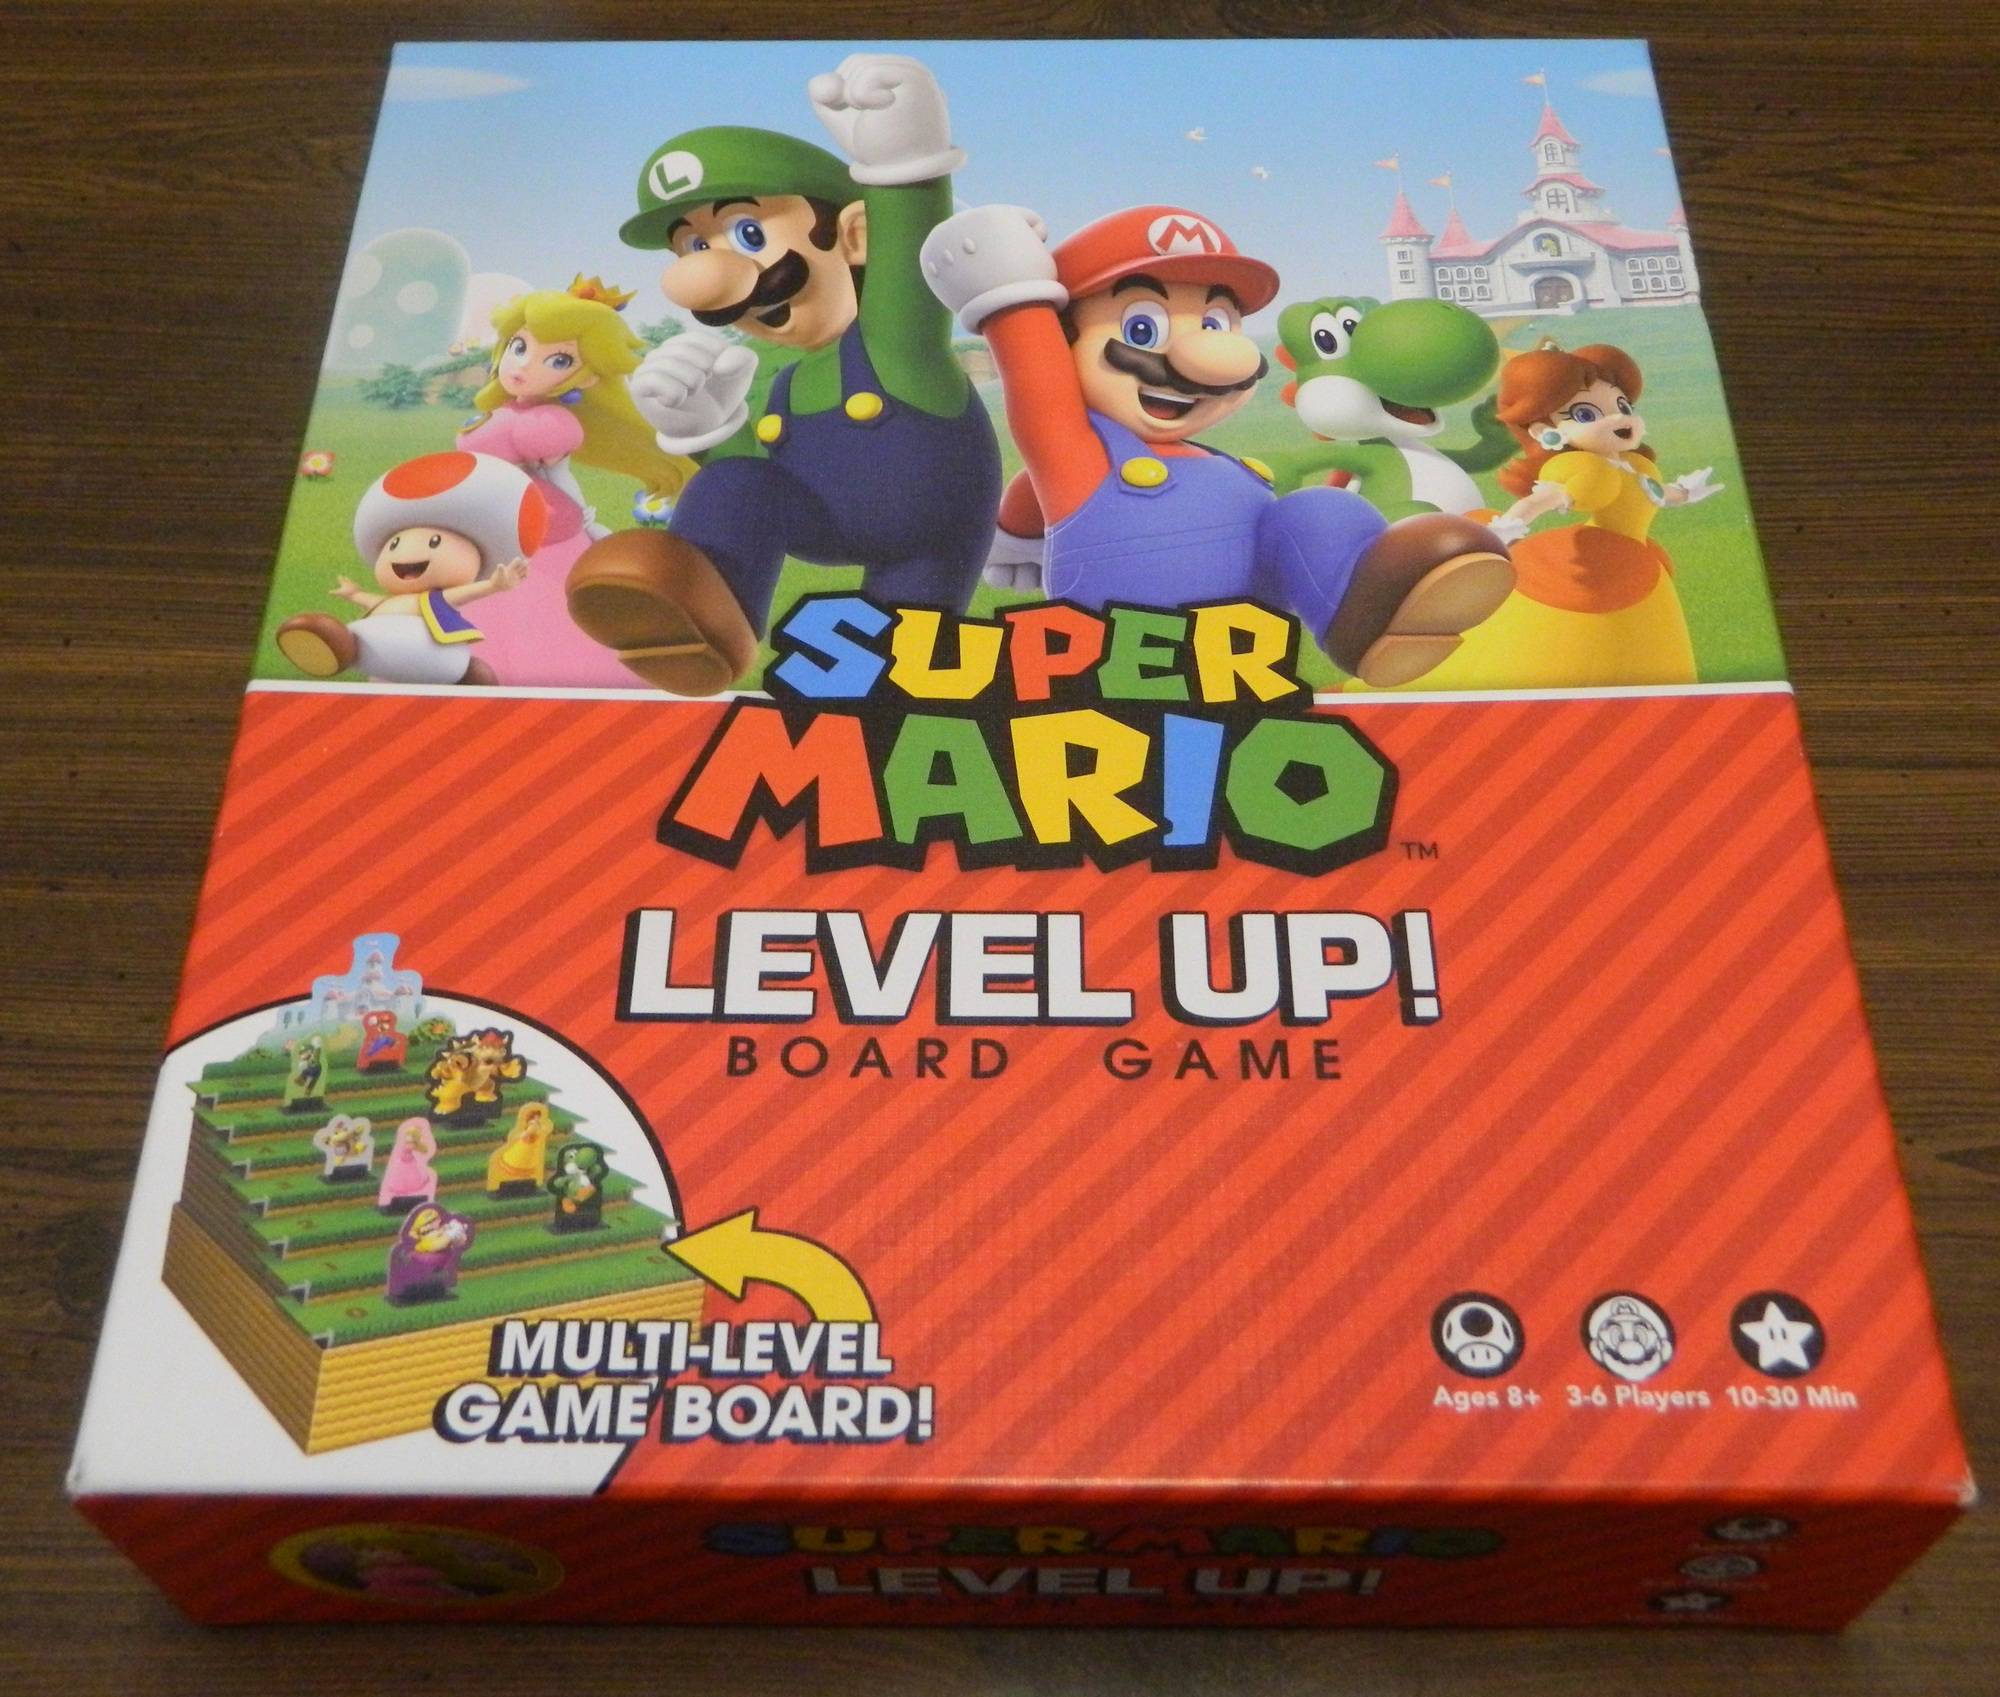 Super Mario Level Up! Board Game Review and Rules